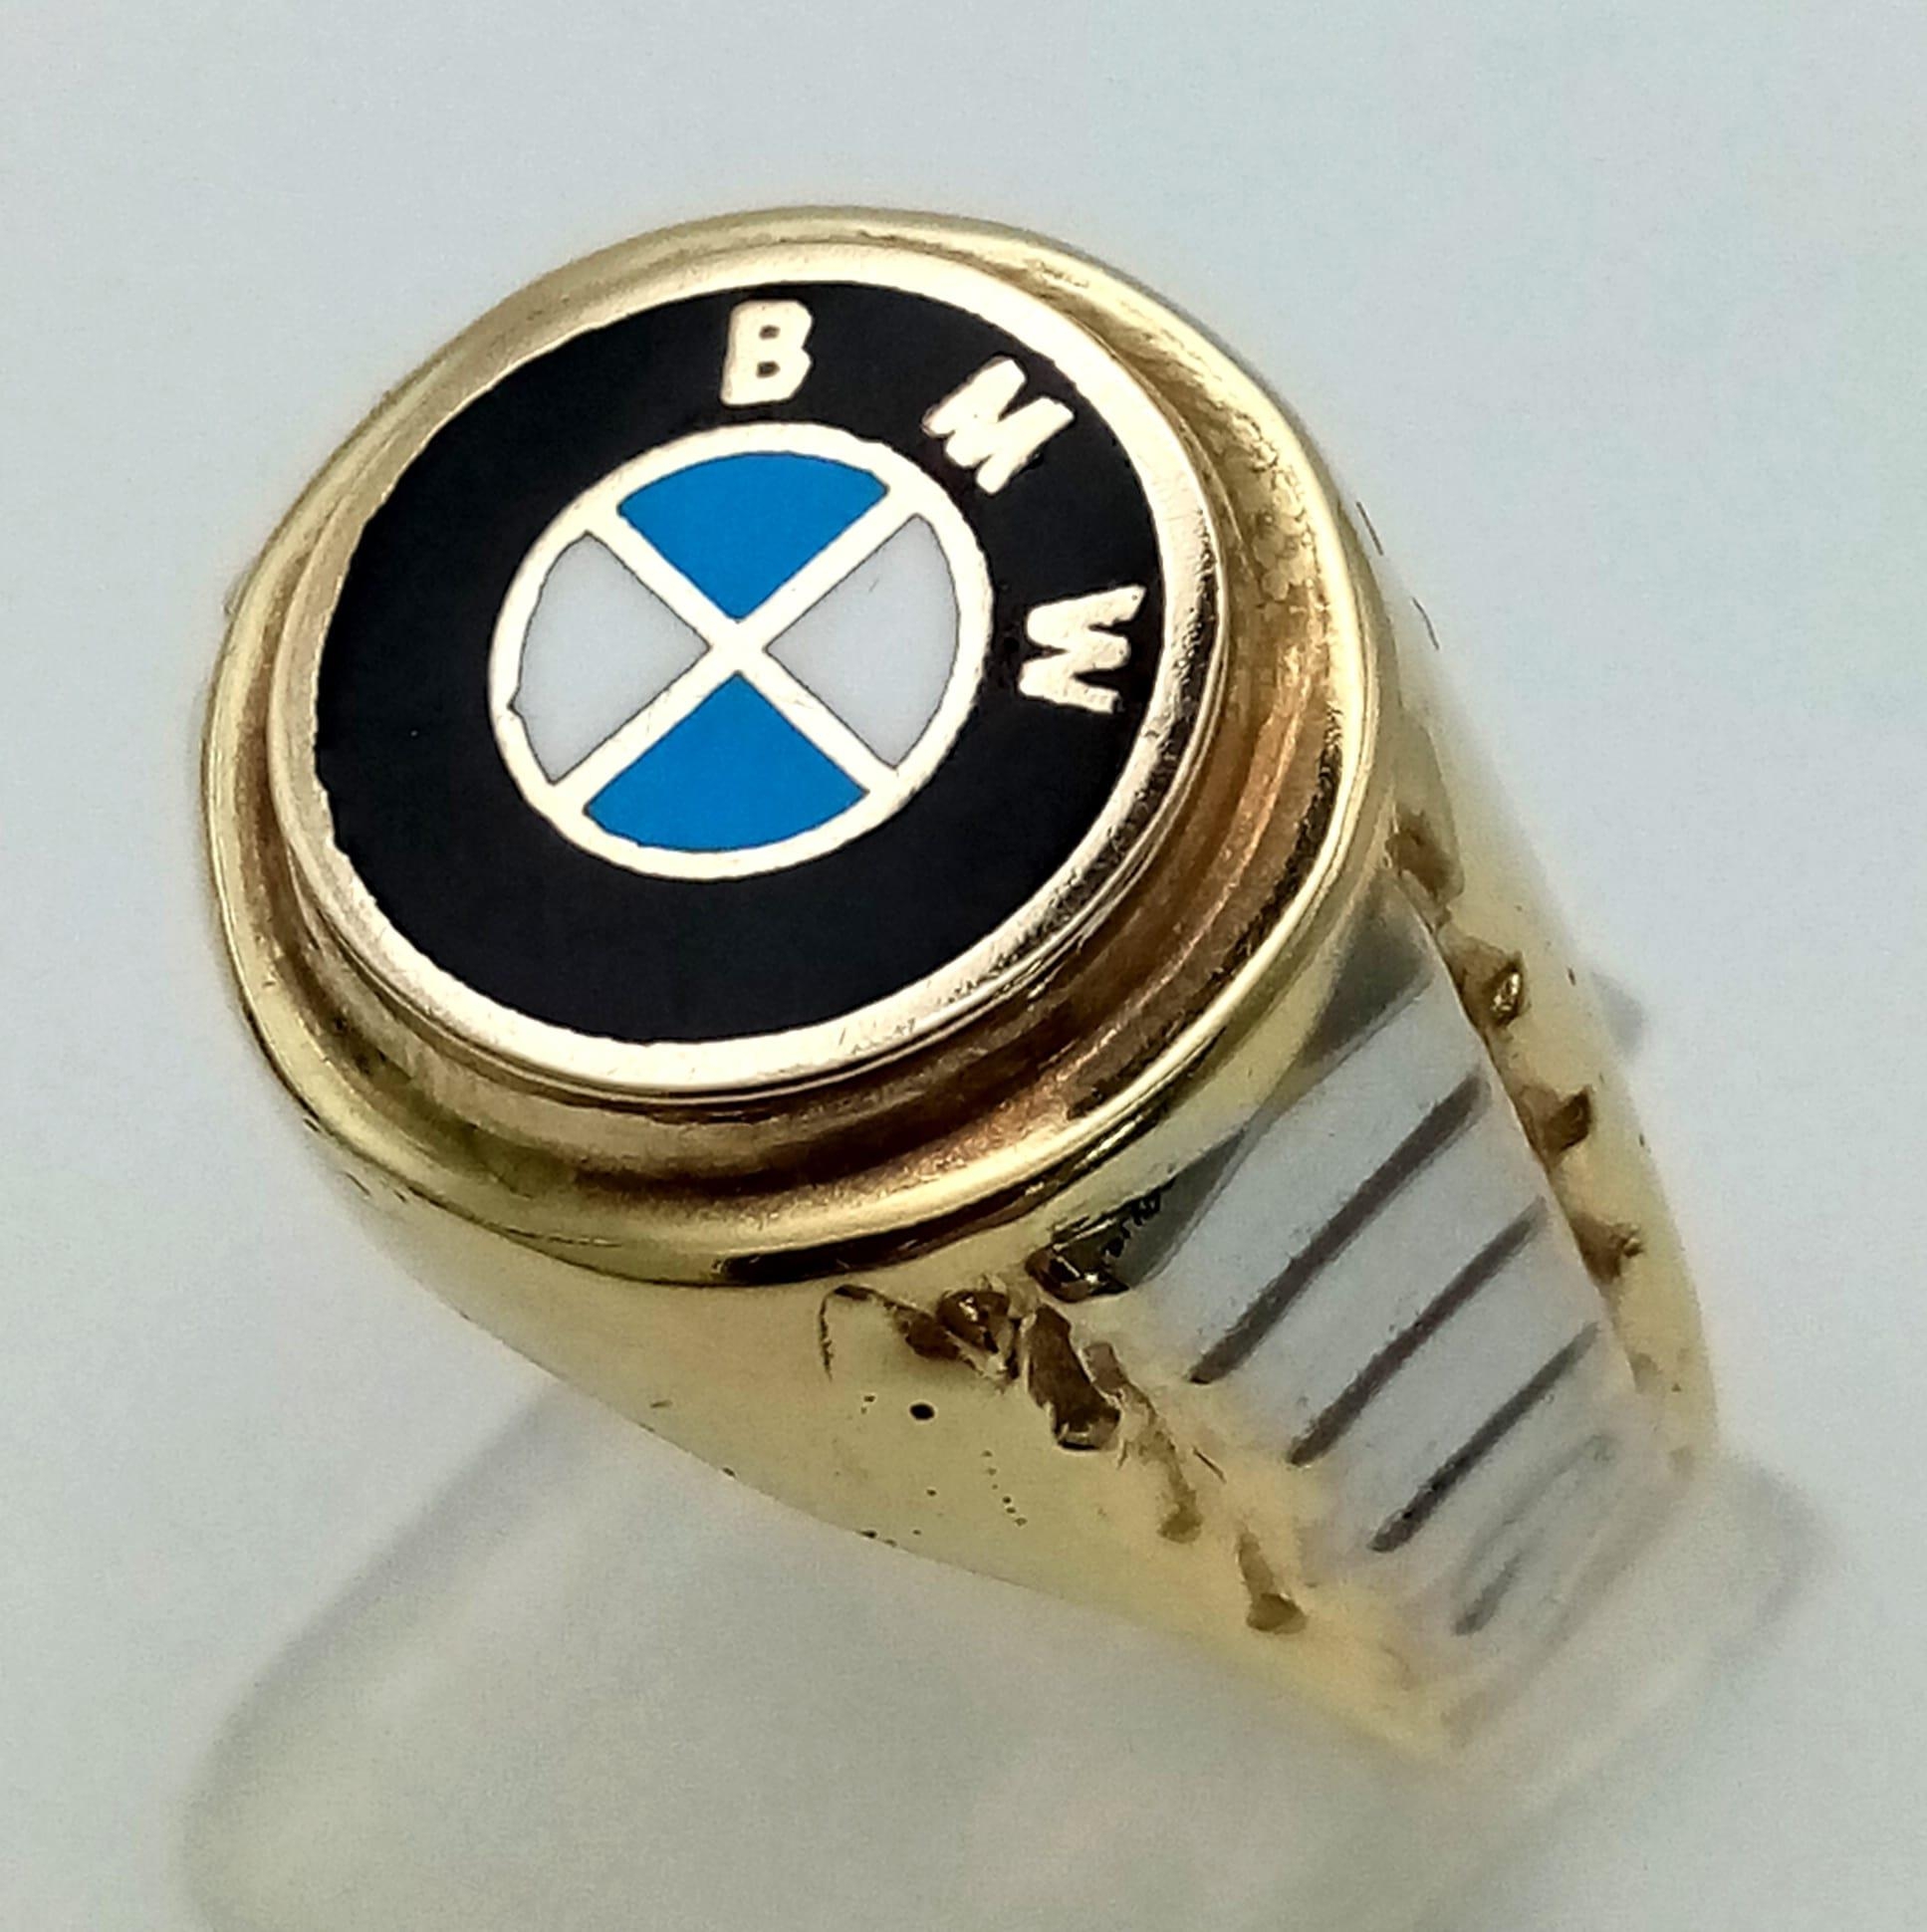 A 14K yellow gold ring with white gold highlights and the BMW logo on top. Ring size: Y, weight: